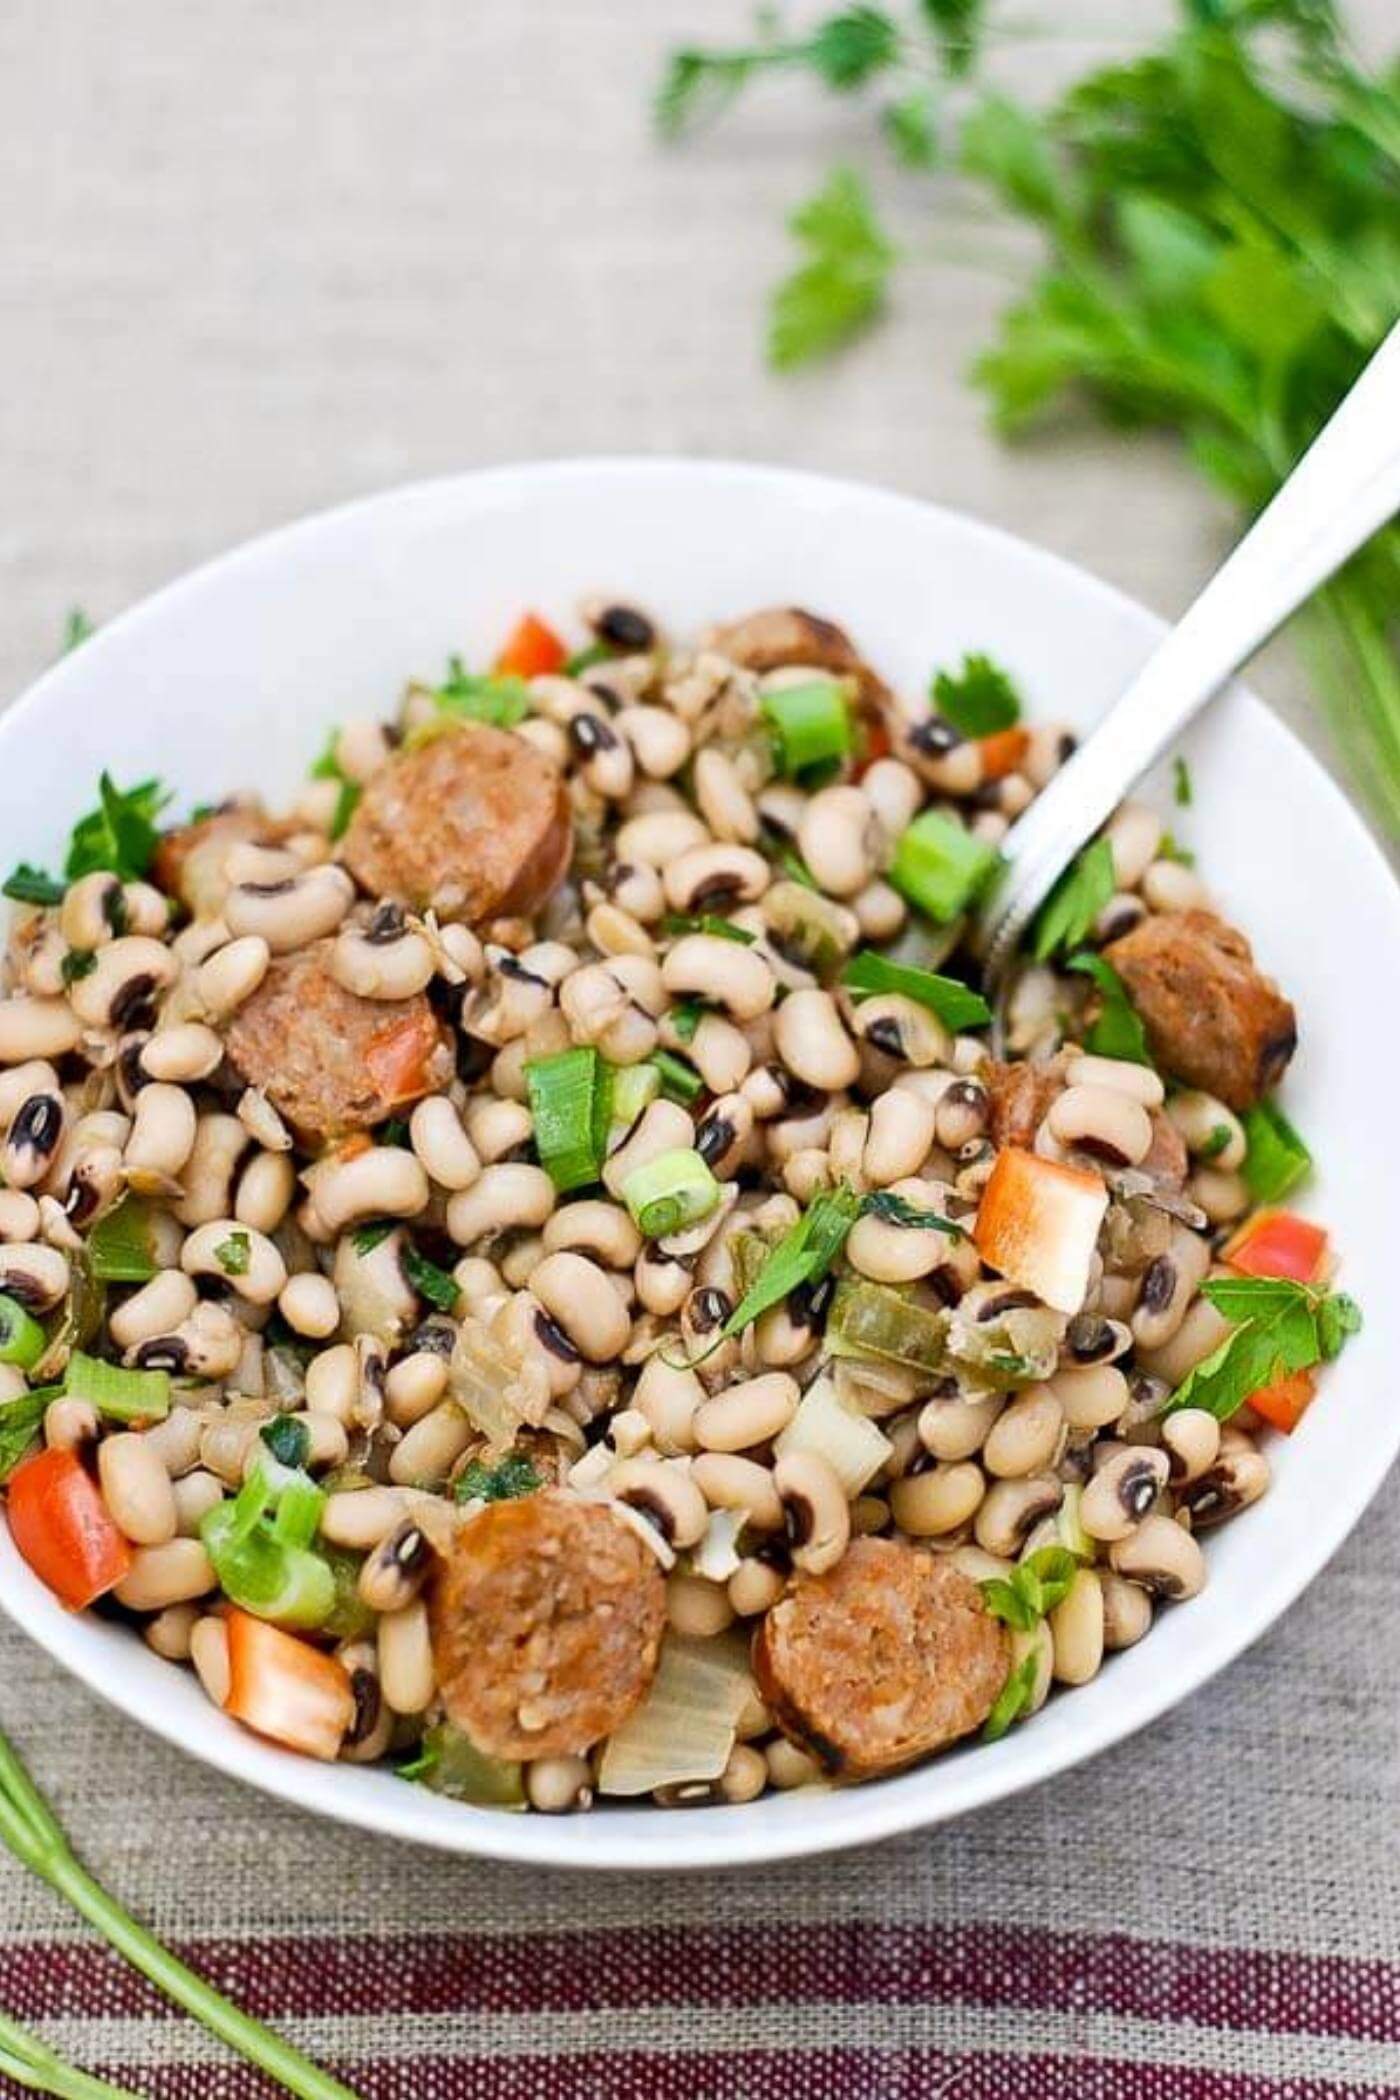 Bowl of hoppin' john with black eyed peas and sausage.